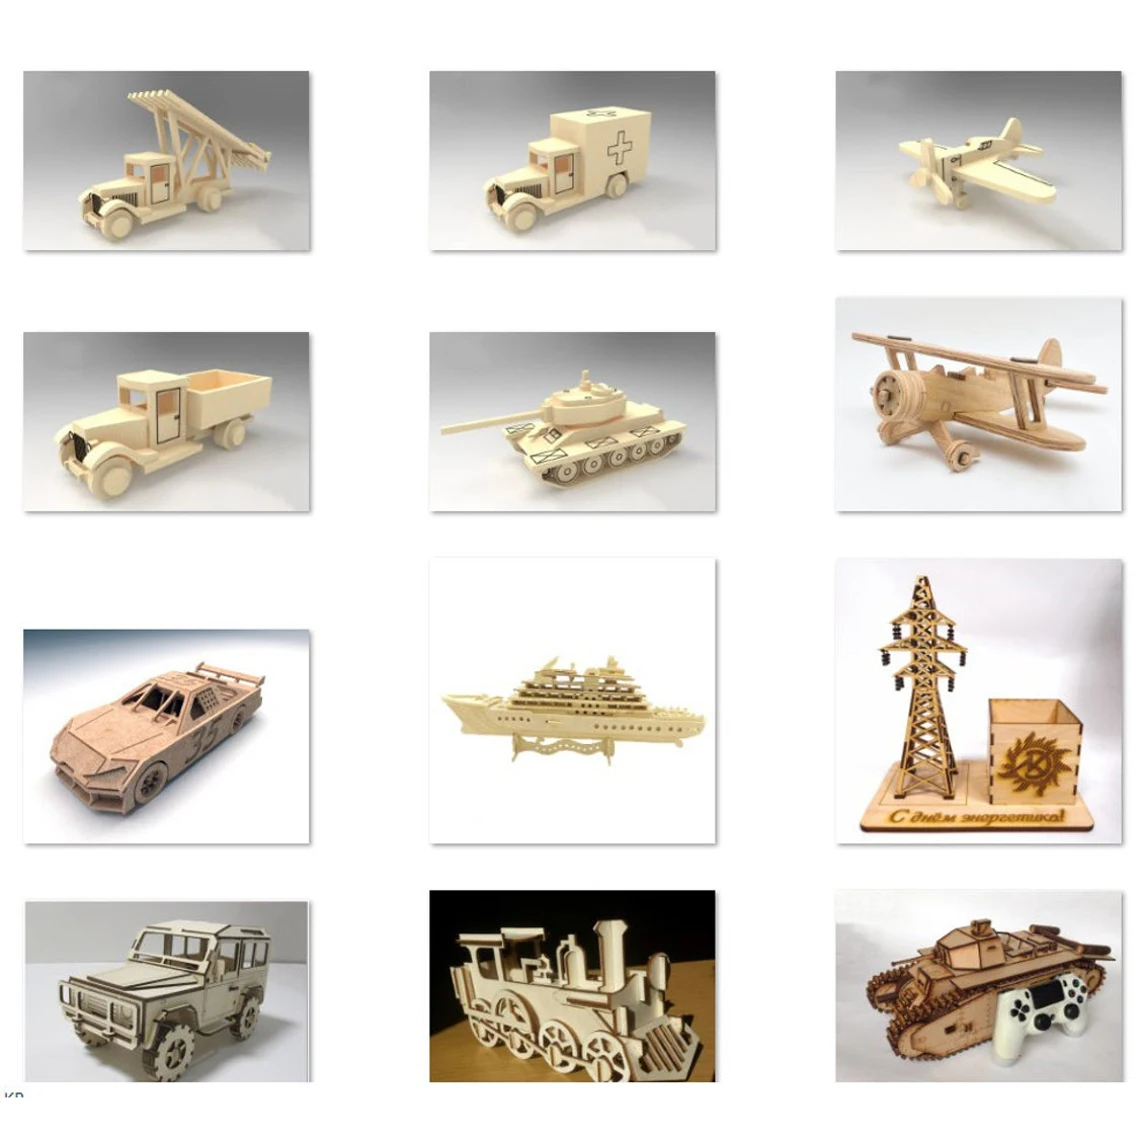 antique woodworking bench 25pcs 3D Puzzle Toy Car Truck Tank Aircraft Laser Cut Templates SVG DXF Vector Plans for CNC Pattern Laser Cut Wood Models foldable woodworking bench